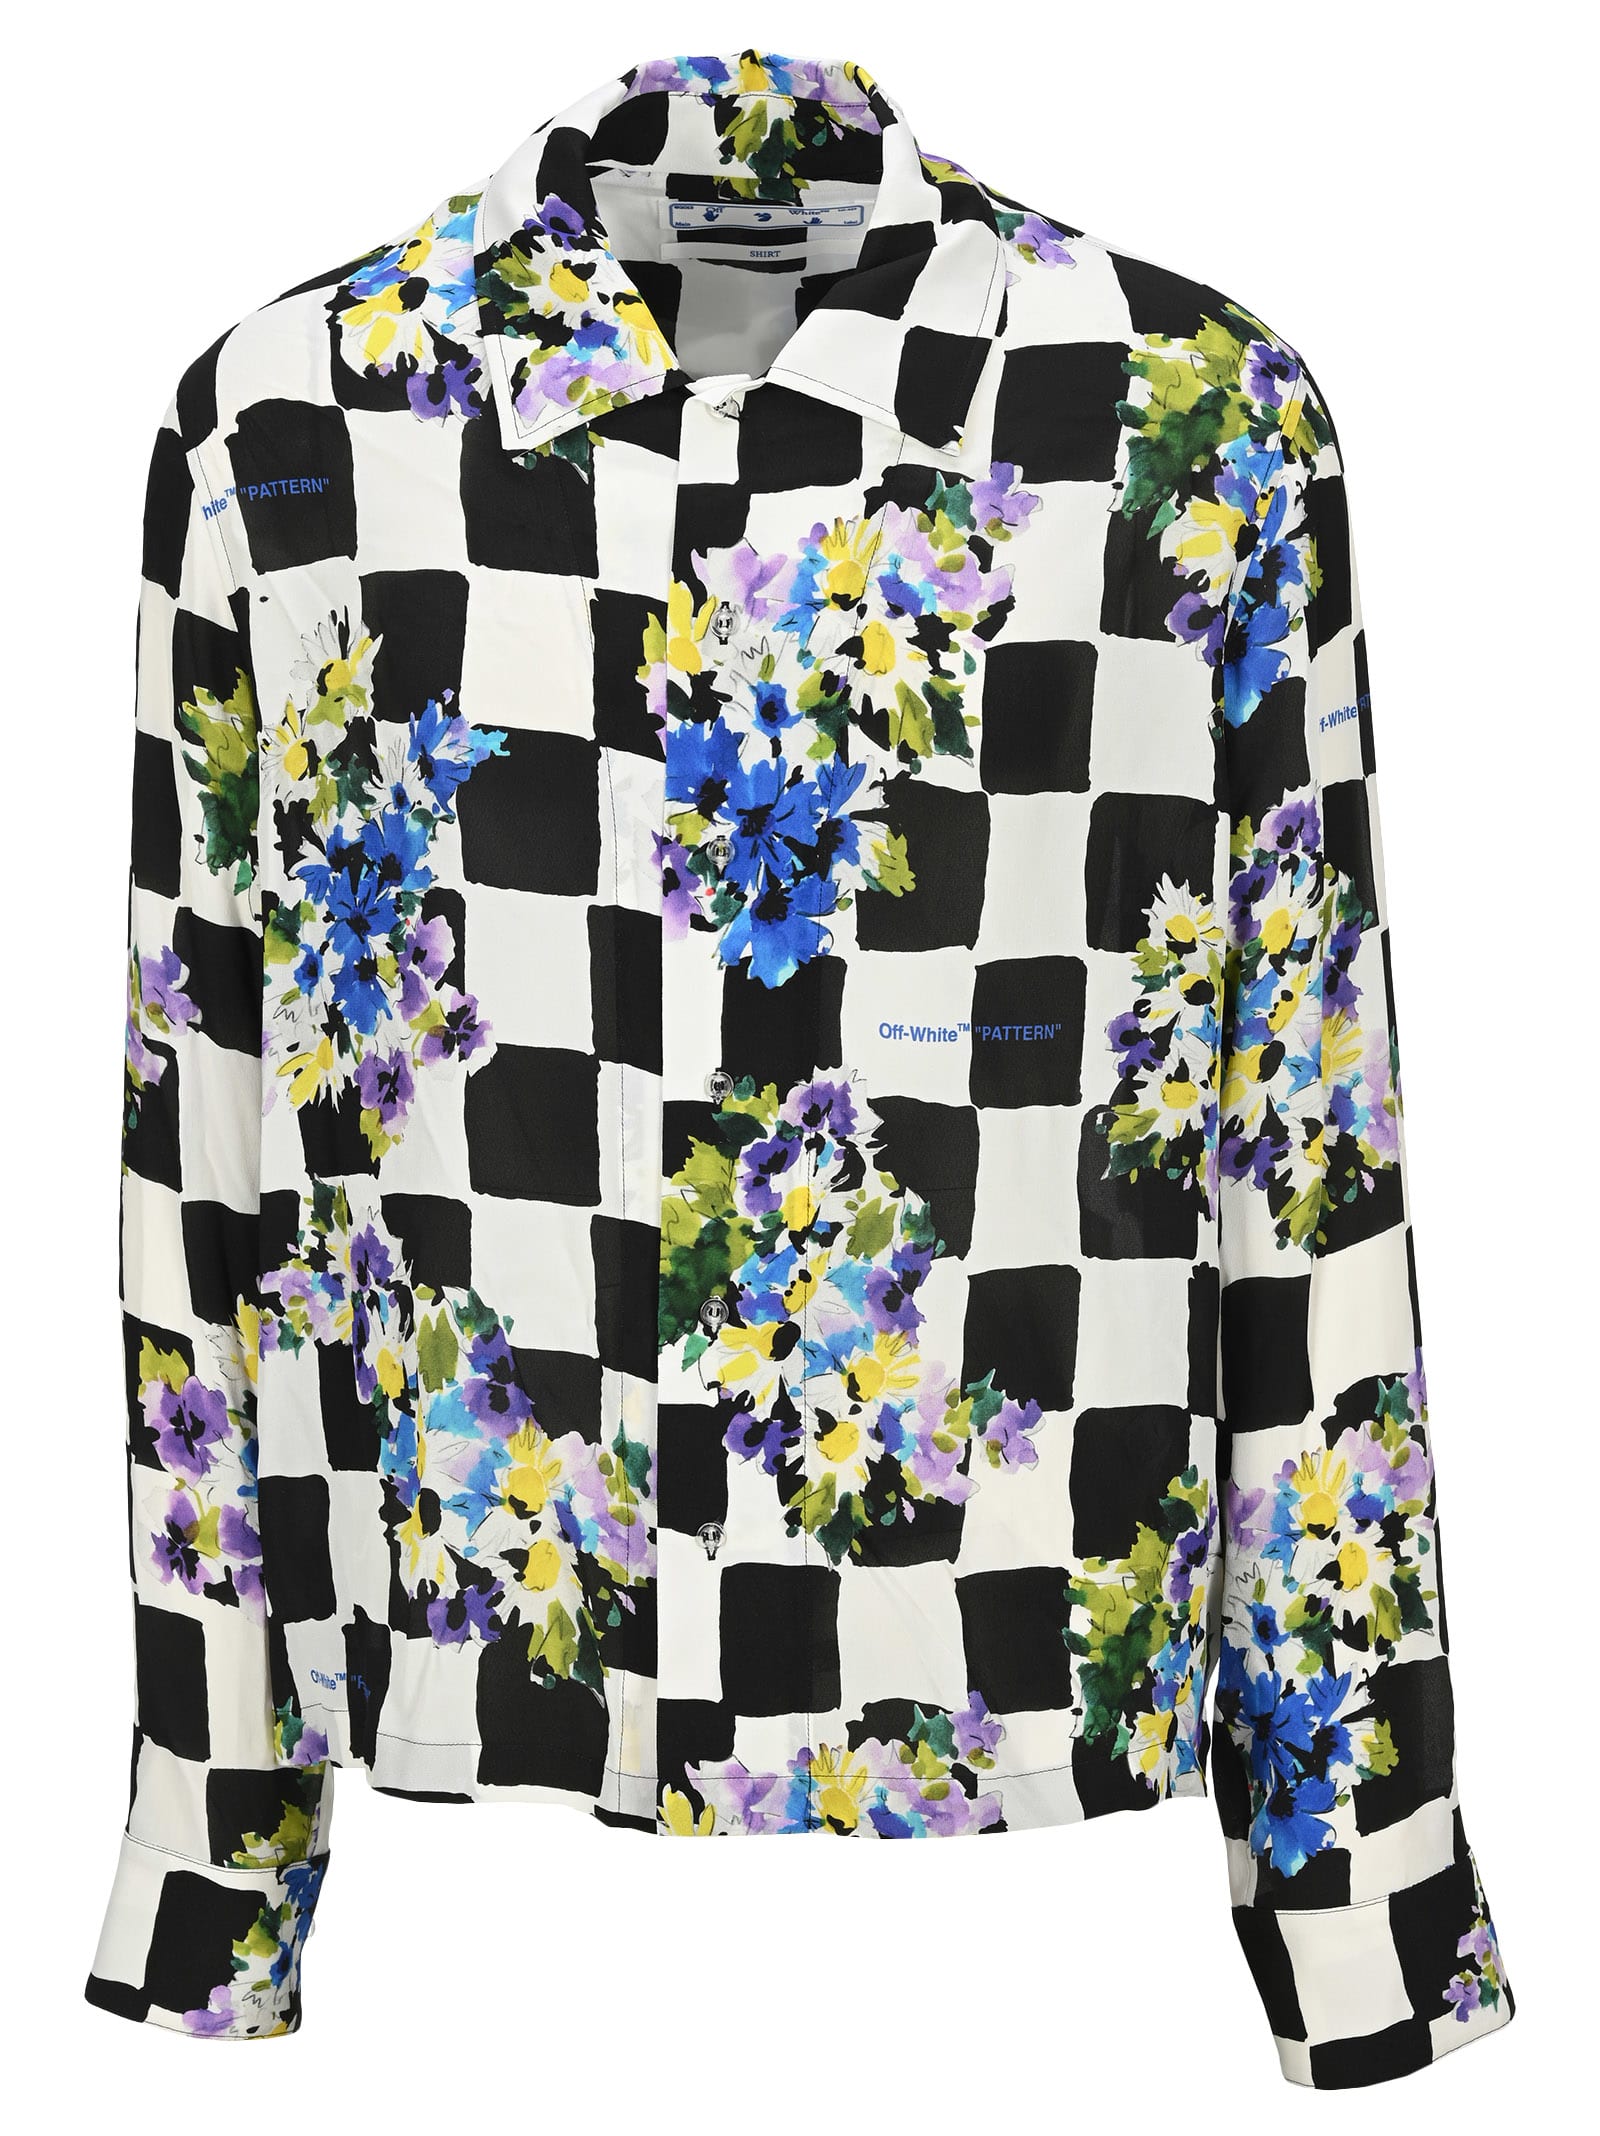 OFF-WHITE OFF WHITE FLORAL PRINT SHIRT,11847781